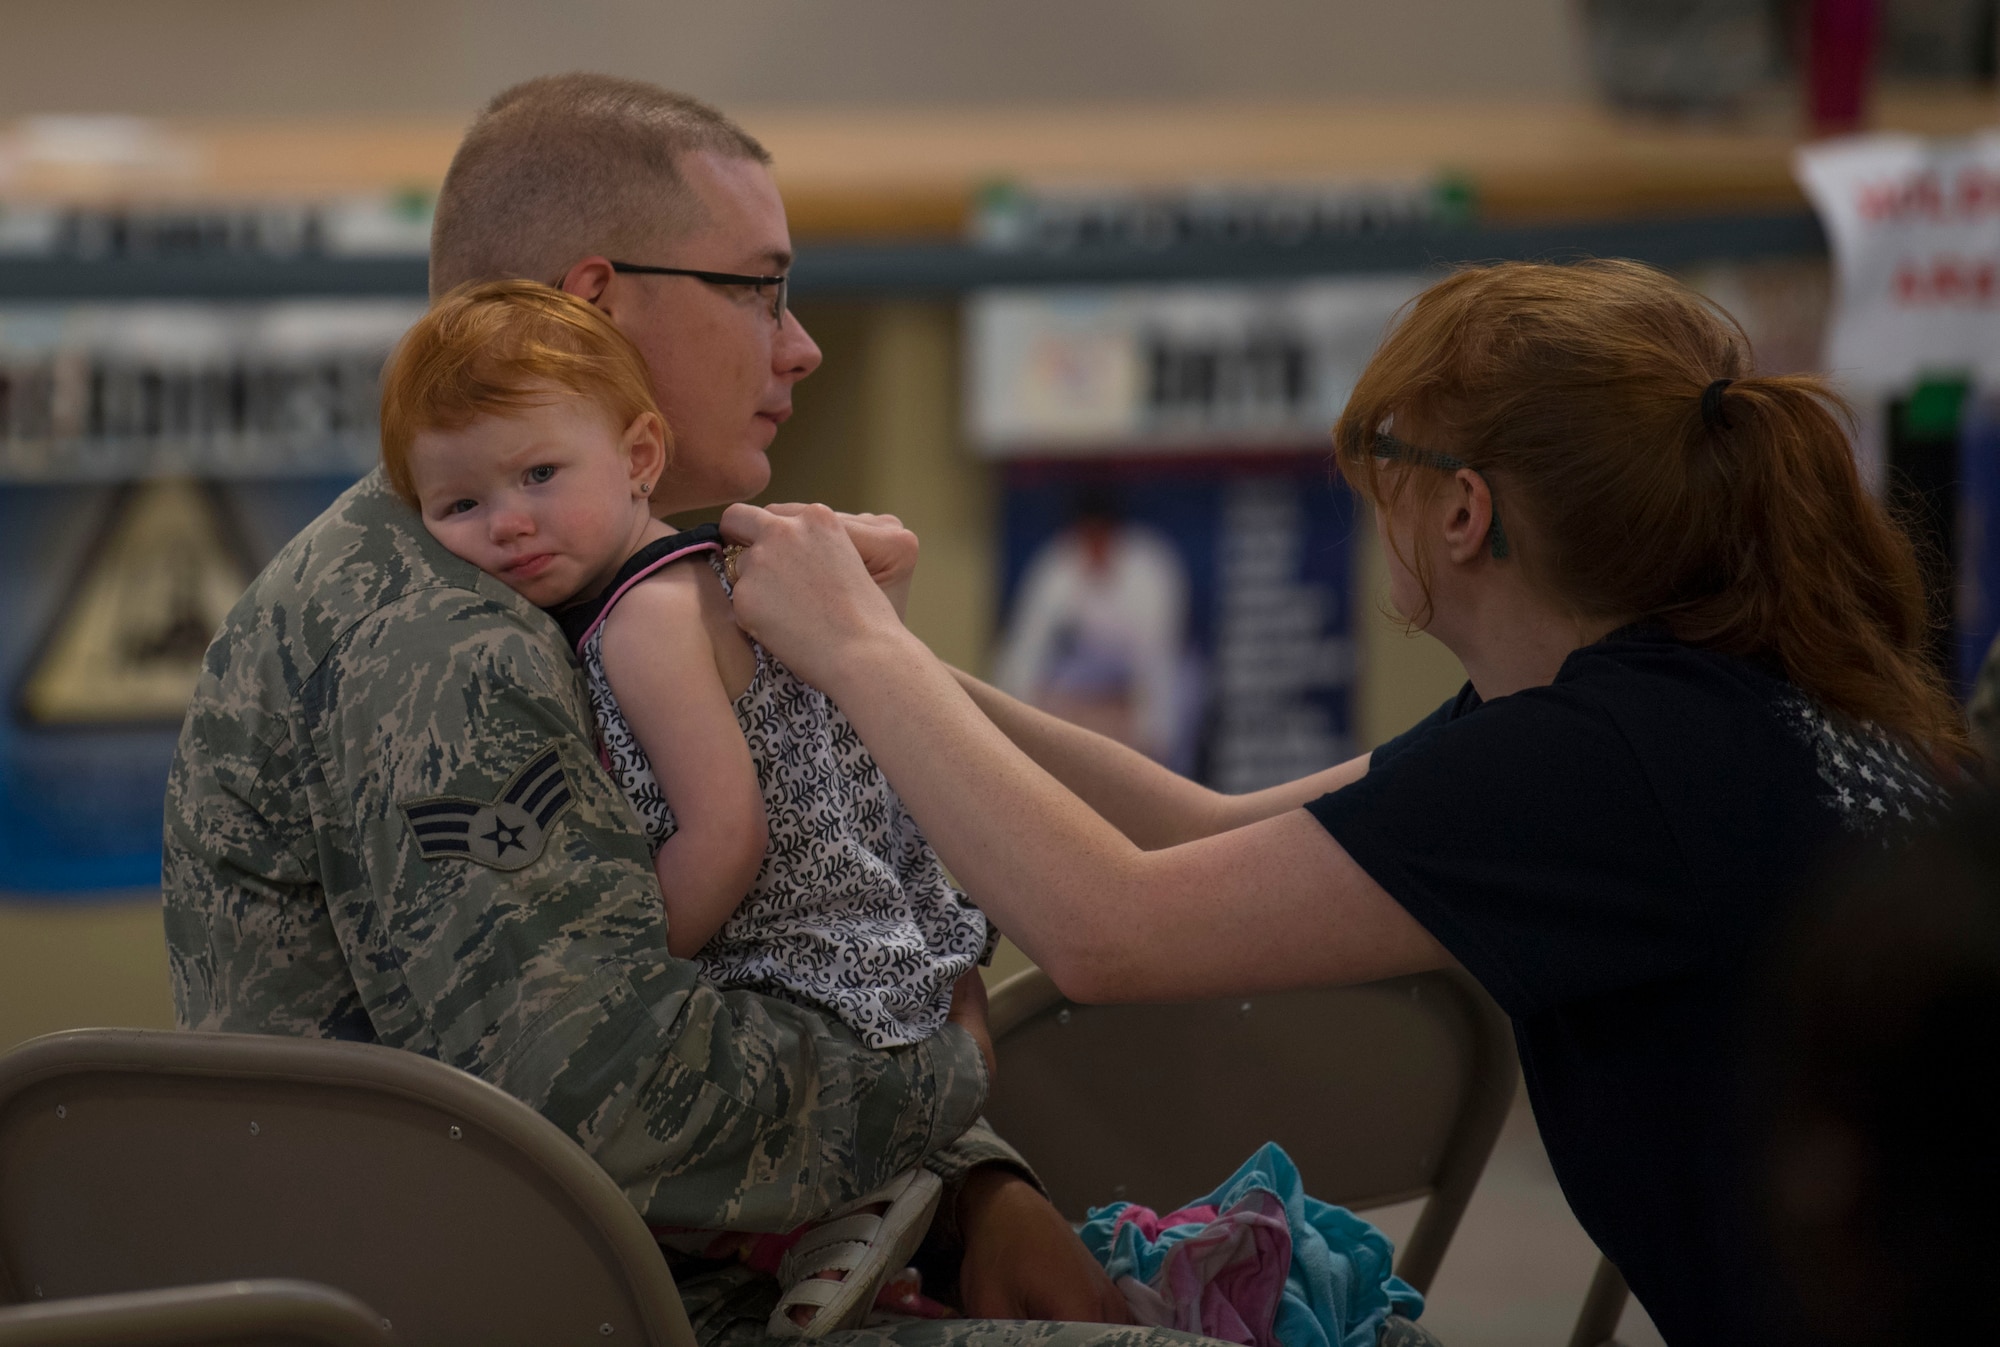 Senior Airman Justin Mullens holds his daughter, Elaina, while his wife looks on, prior to deploying in support of Operation Freedom Sentinel on June 25, 2017 prior to departing McLaughlin Air National Guard base for a deployment in support of Operation Freedom’s Sentinel on June 25, 2017. Mullens is an aircraft structural maintainer with the 130th Airlift Wing. (U.S. Air National Guard photo by Tech. Sgt. De-Juan Haley)